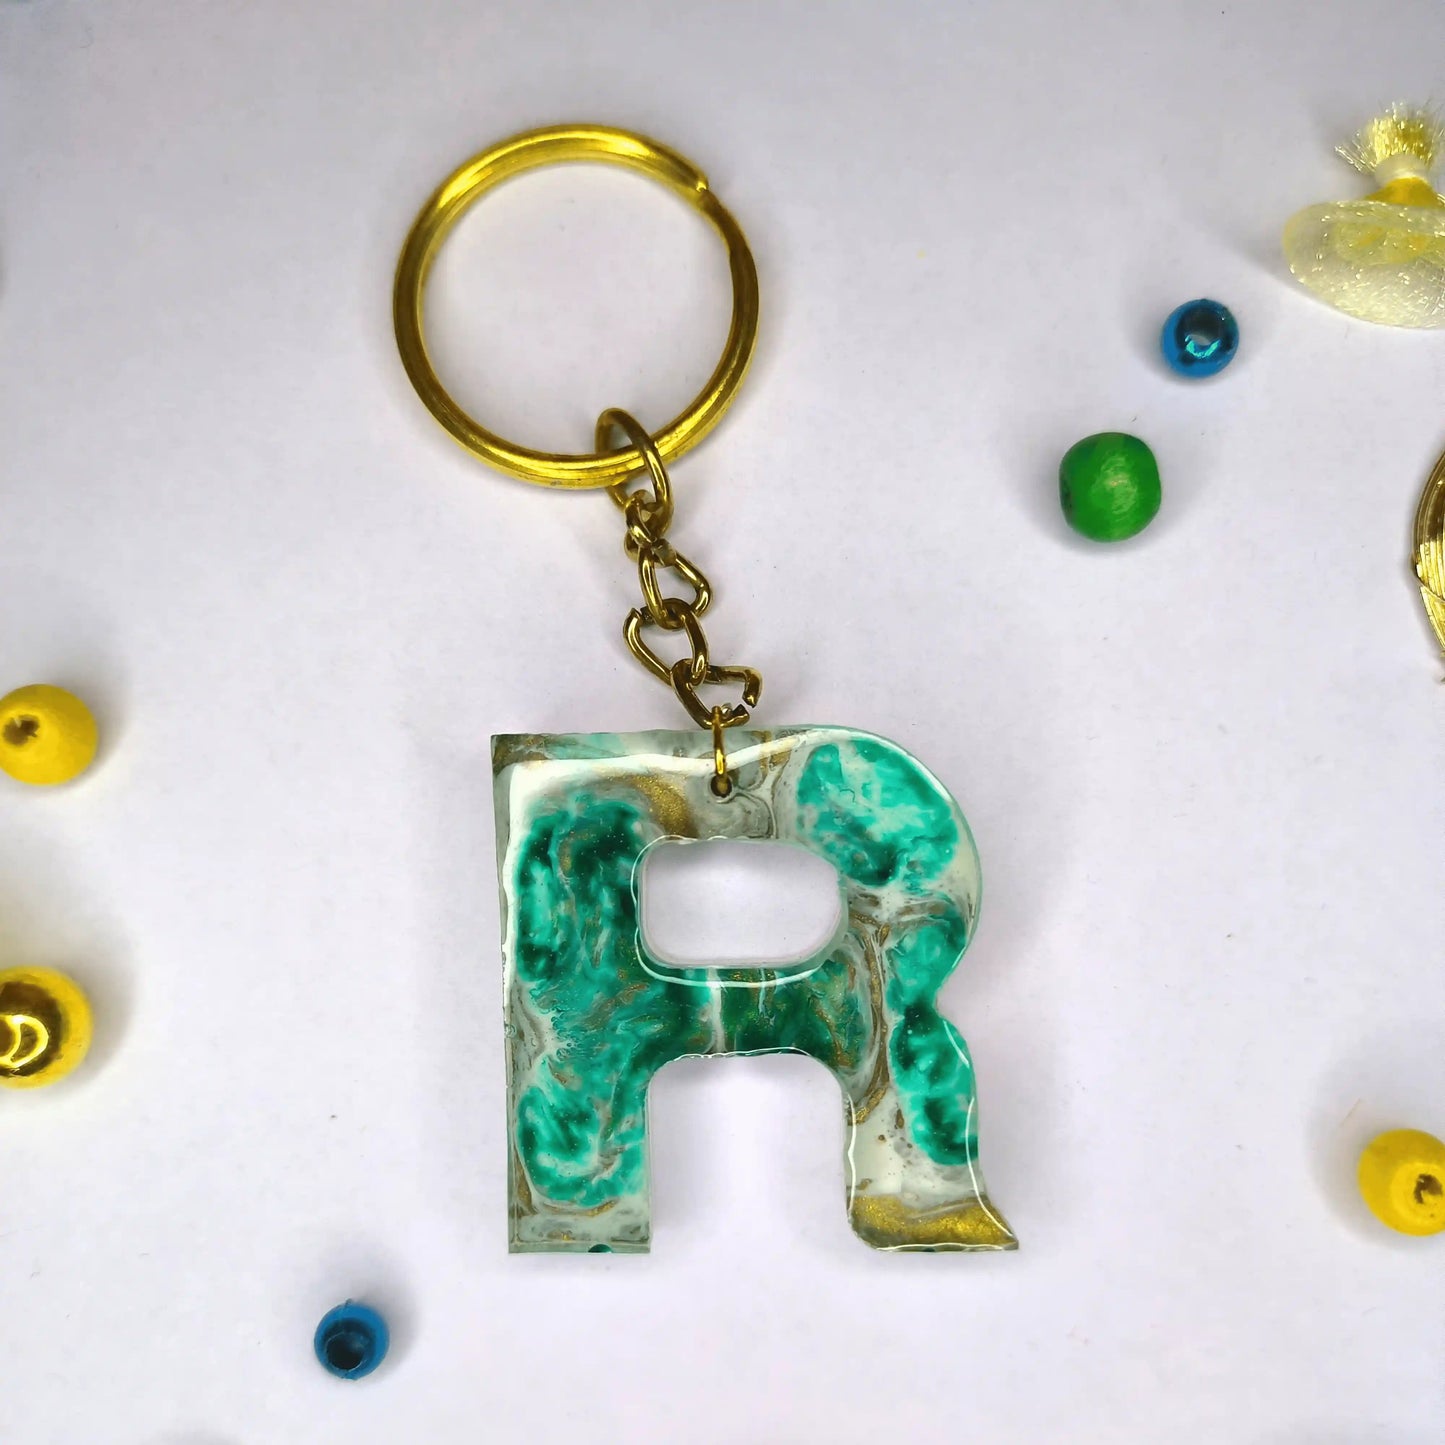 Get Trendy Geode Resin Keychains with beautiful R initials for Car & Bike